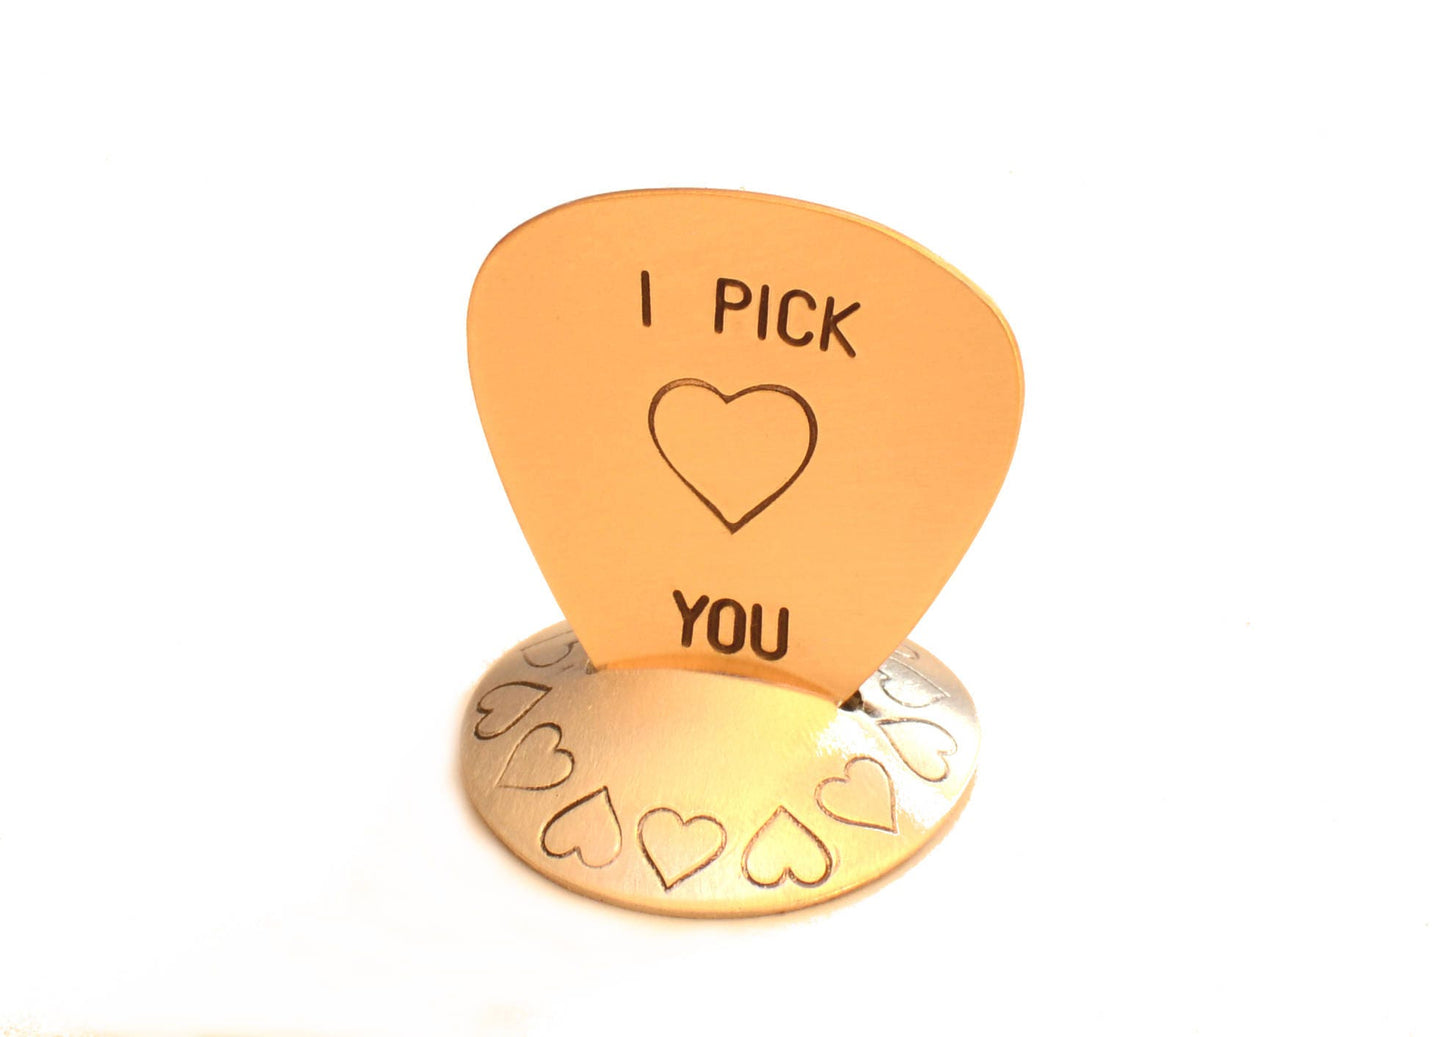 I Pick You on a Bronze Guitar Pick with a Heart